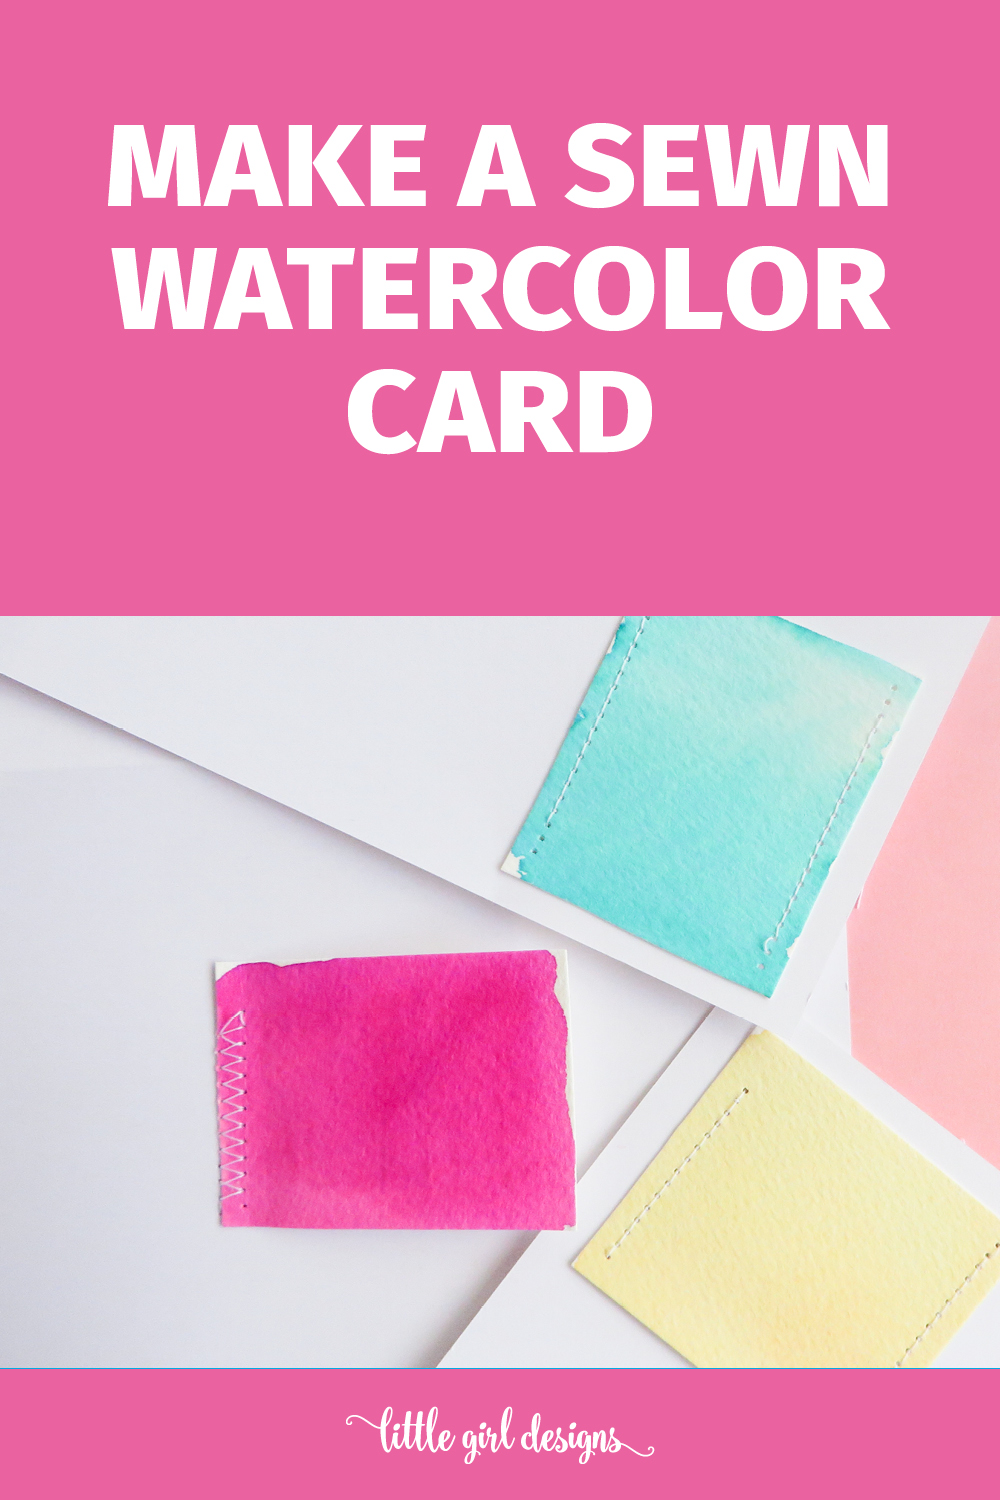 Make these simple sewn watercolor cards to send sweet snail mail or to send as a gift! What a great idea.